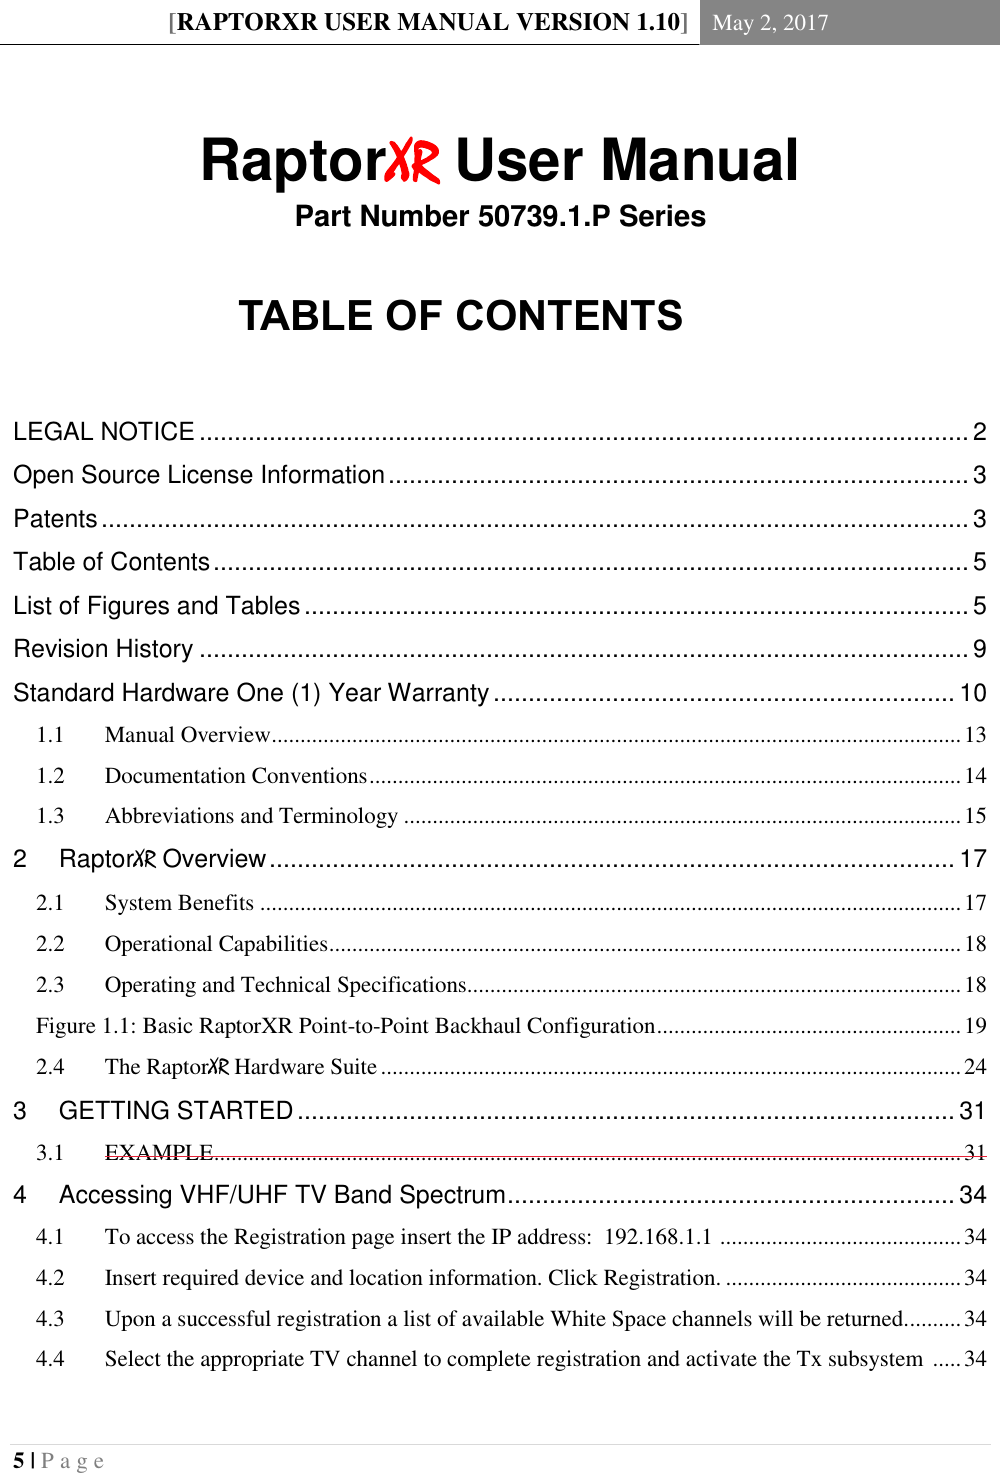 [RAPTORXR USER MANUAL VERSION 1.10] May 2, 2017  5 | P a g e    RaptorXR User Manual Part Number 50739.1.P Series  TABLE OF CONTENTS  LEGAL NOTICE .............................................................................................................. 2 Open Source License Information ................................................................................... 3 Patents ............................................................................................................................ 3 Table of Contents ............................................................................................................ 5 List of Figures and Tables ............................................................................................... 5  Revision History .............................................................................................................. 9 Standard Hardware One (1) Year Warranty .................................................................. 10   Manual Overview ........................................................................................................................ 13 1.1  Documentation Conventions ....................................................................................................... 14 1.2  Abbreviations and Terminology ................................................................................................. 15 1.32 RaptorXR Overview .................................................................................................. 17   System Benefits .......................................................................................................................... 17 2.1  Operational Capabilities .............................................................................................................. 18 2.2  Operating and Technical Specifications...................................................................................... 18 2.3Figure 1.1: Basic RaptorXR Point-to-Point Backhaul Configuration ..................................................... 19   The RaptorXR Hardware Suite ..................................................................................................... 24 2.43 GETTING STARTED .............................................................................................. 31   EXAMPLE .................................................................................................................................. 31 3.14 Accessing VHF/UHF TV Band Spectrum ................................................................ 34   To access the Registration page insert the IP address:  192.168.1.1  .......................................... 34 4.1  Insert required device and location information. Click Registration. ......................................... 34 4.2  Upon a successful registration a list of available White Space channels will be returned. ......... 34 4.3  Select the appropriate TV channel to complete registration and activate the Tx subsystem  ..... 34 4.4